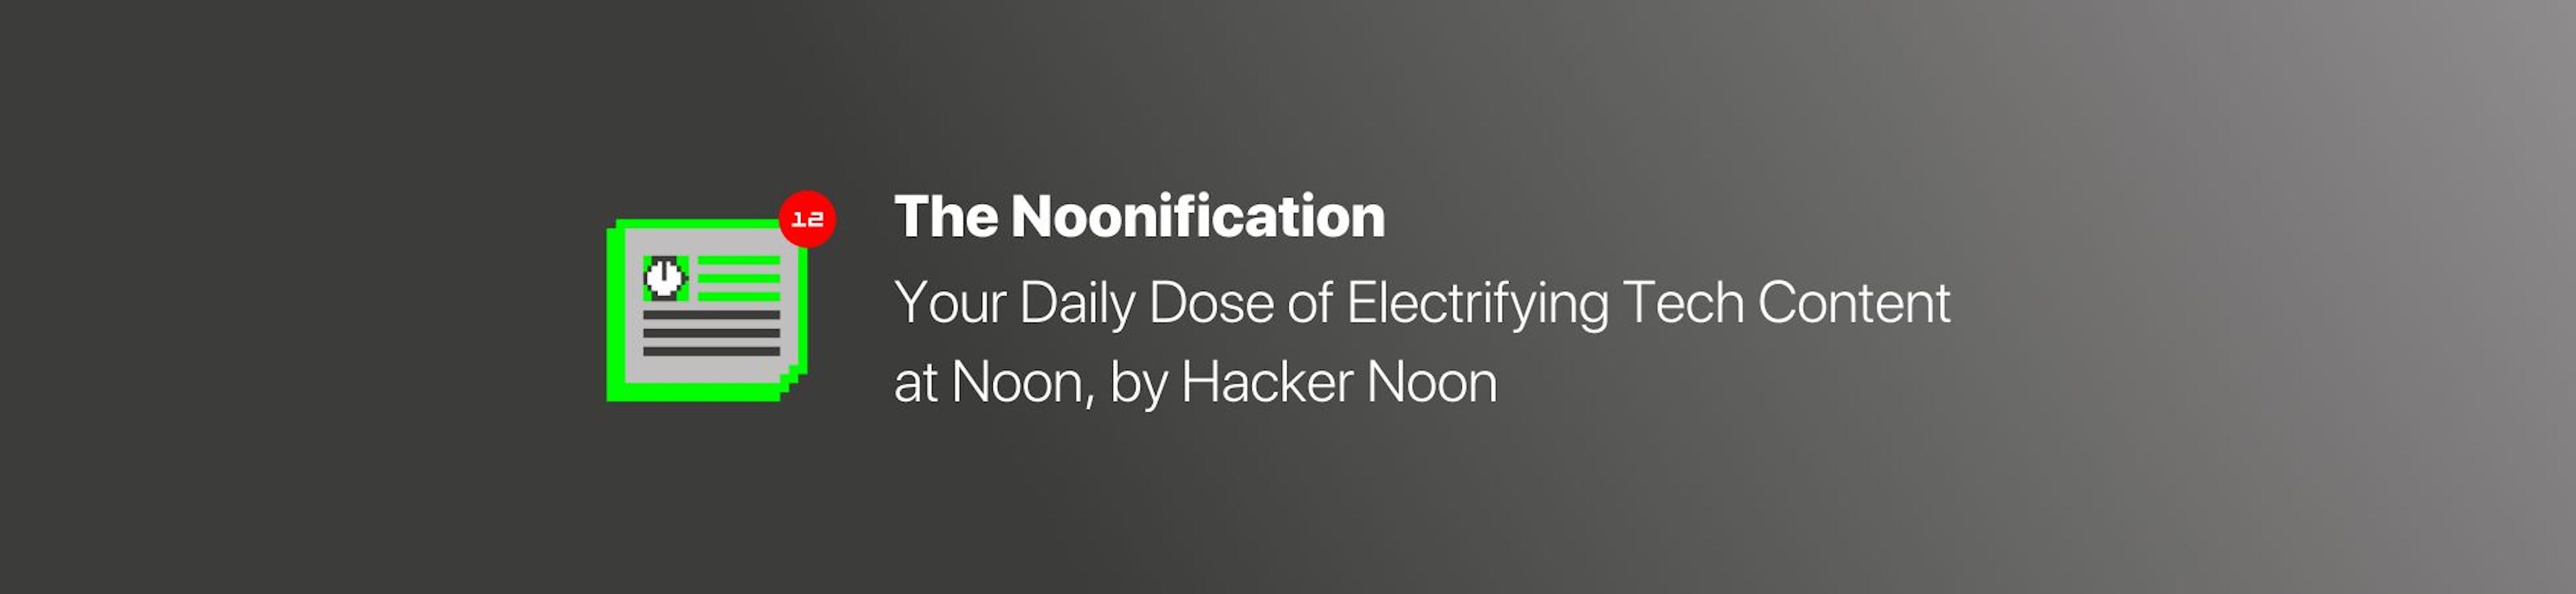 /noonification-your-daily-dose-of-electrifying-tech-content-at-noon-by-hacker-noon feature image